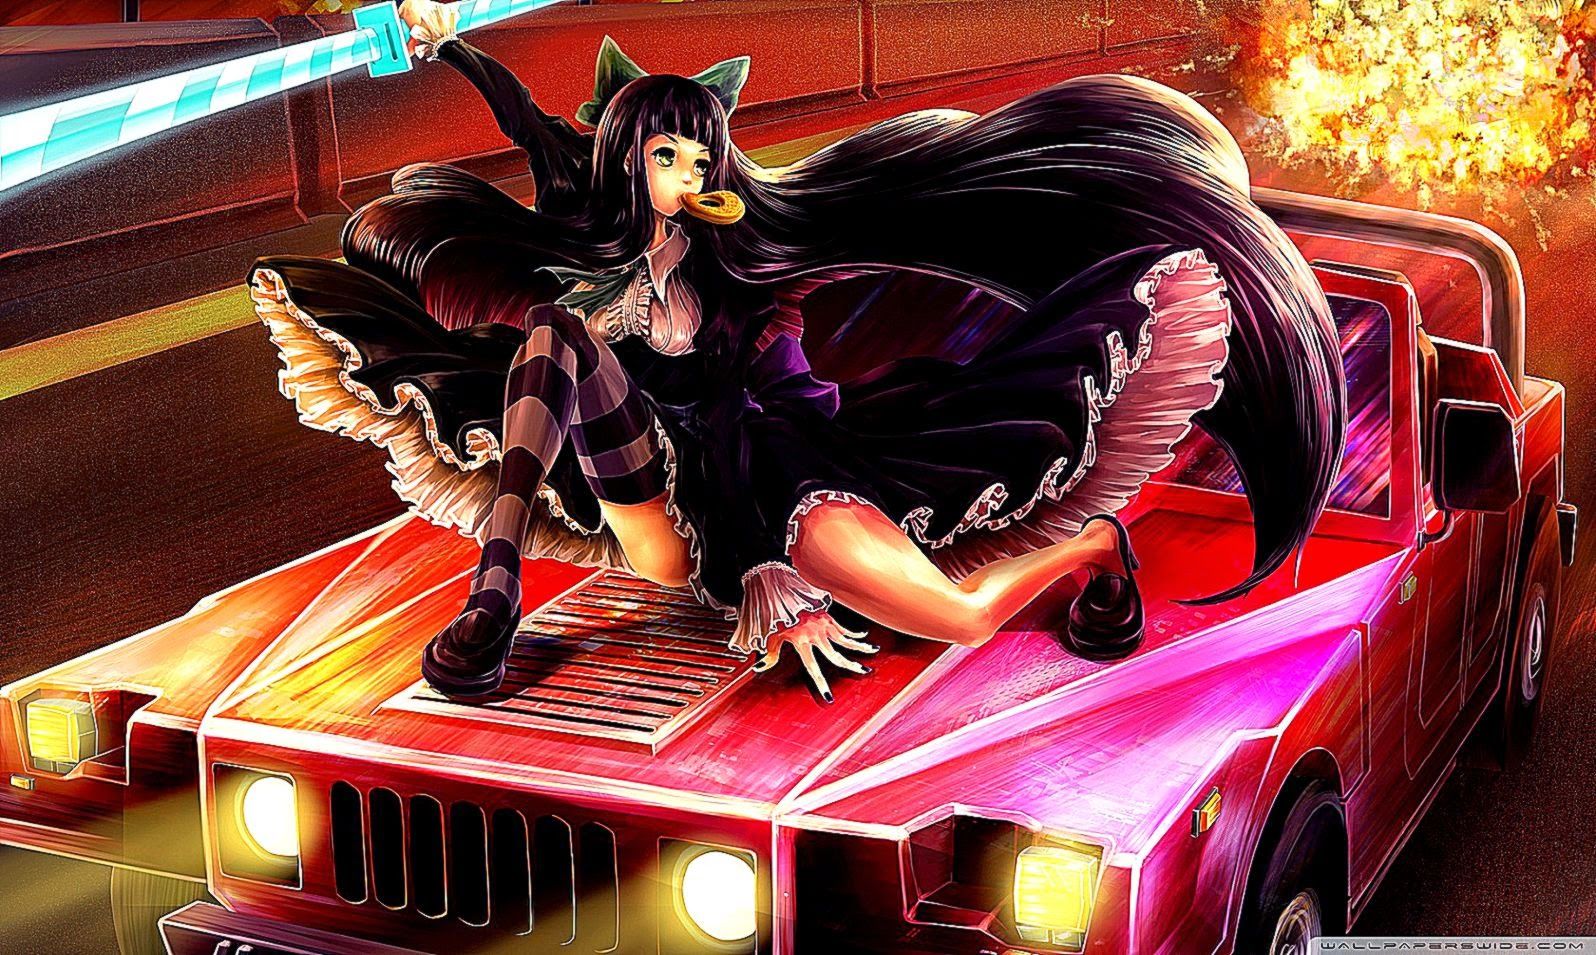 412299 4K, Race Queen Outfit, dress, black hair, women with cars, anime  girls, car - Rare Gallery HD Wallpapers